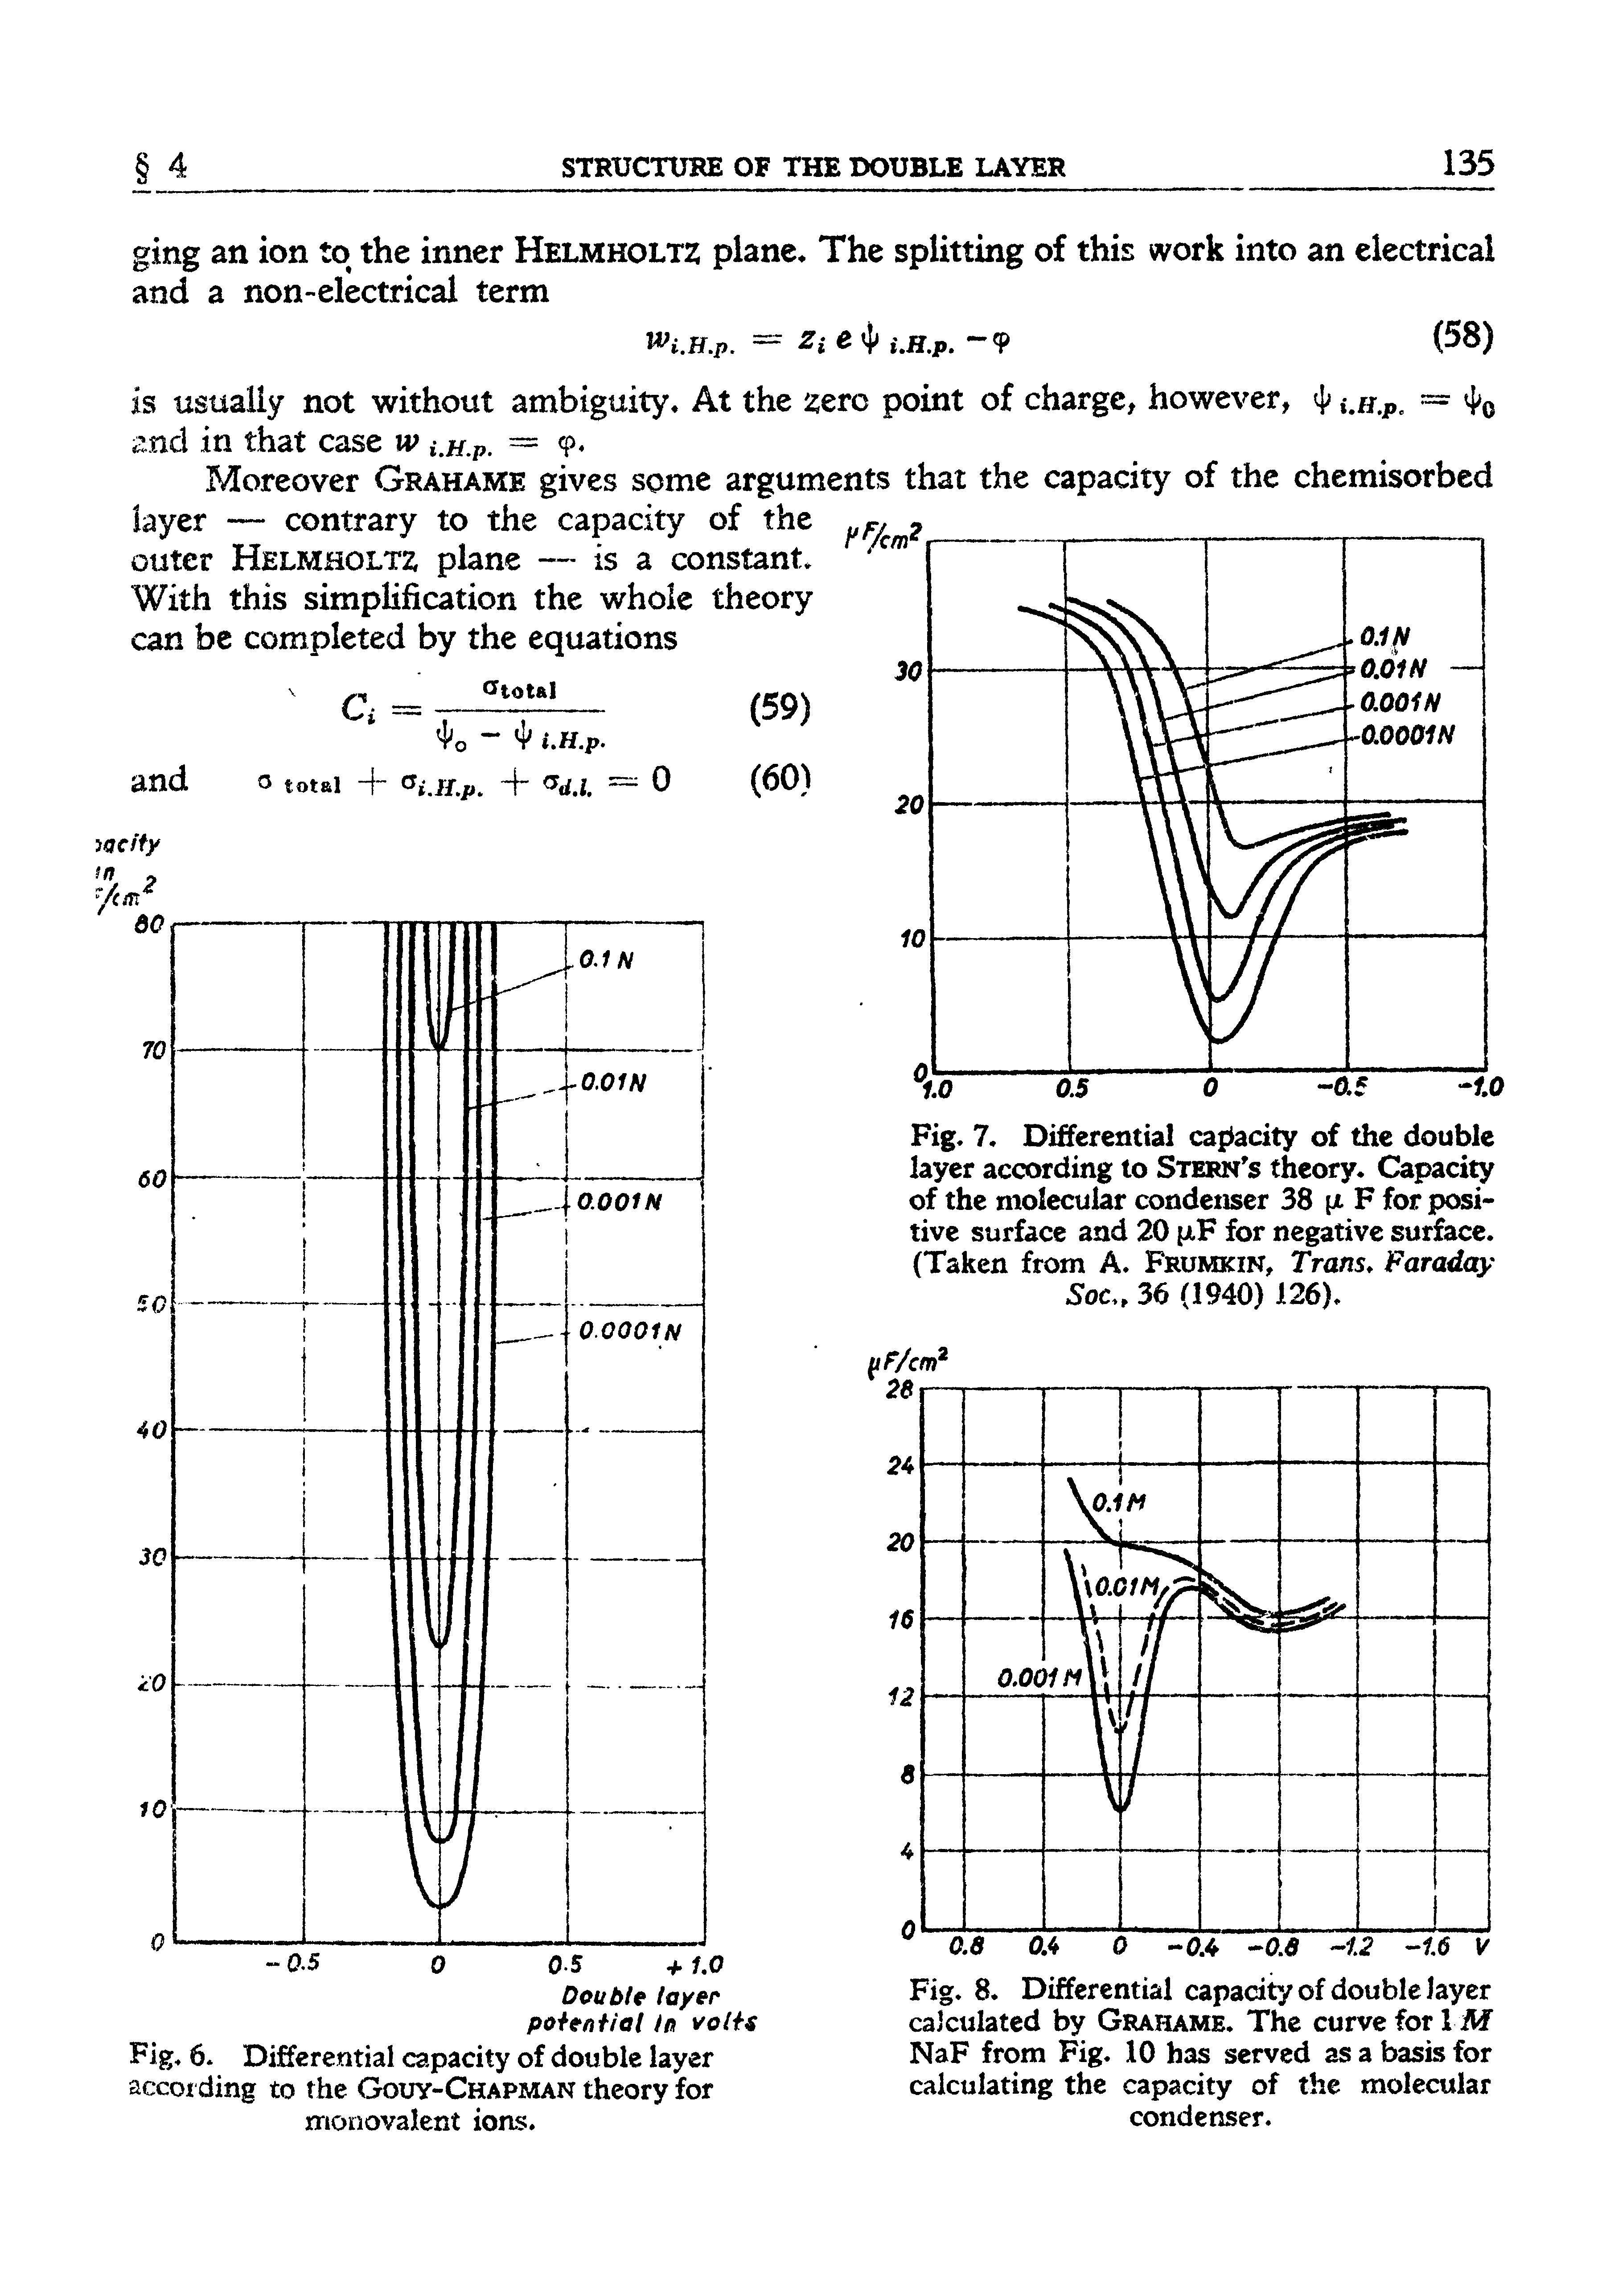 Fig. 8. Differential capacity of double layer calculated by Grahame. The curve for IM NaF from Fig. 10 has served as a basis for calculating the capacity of the molecular condenser.